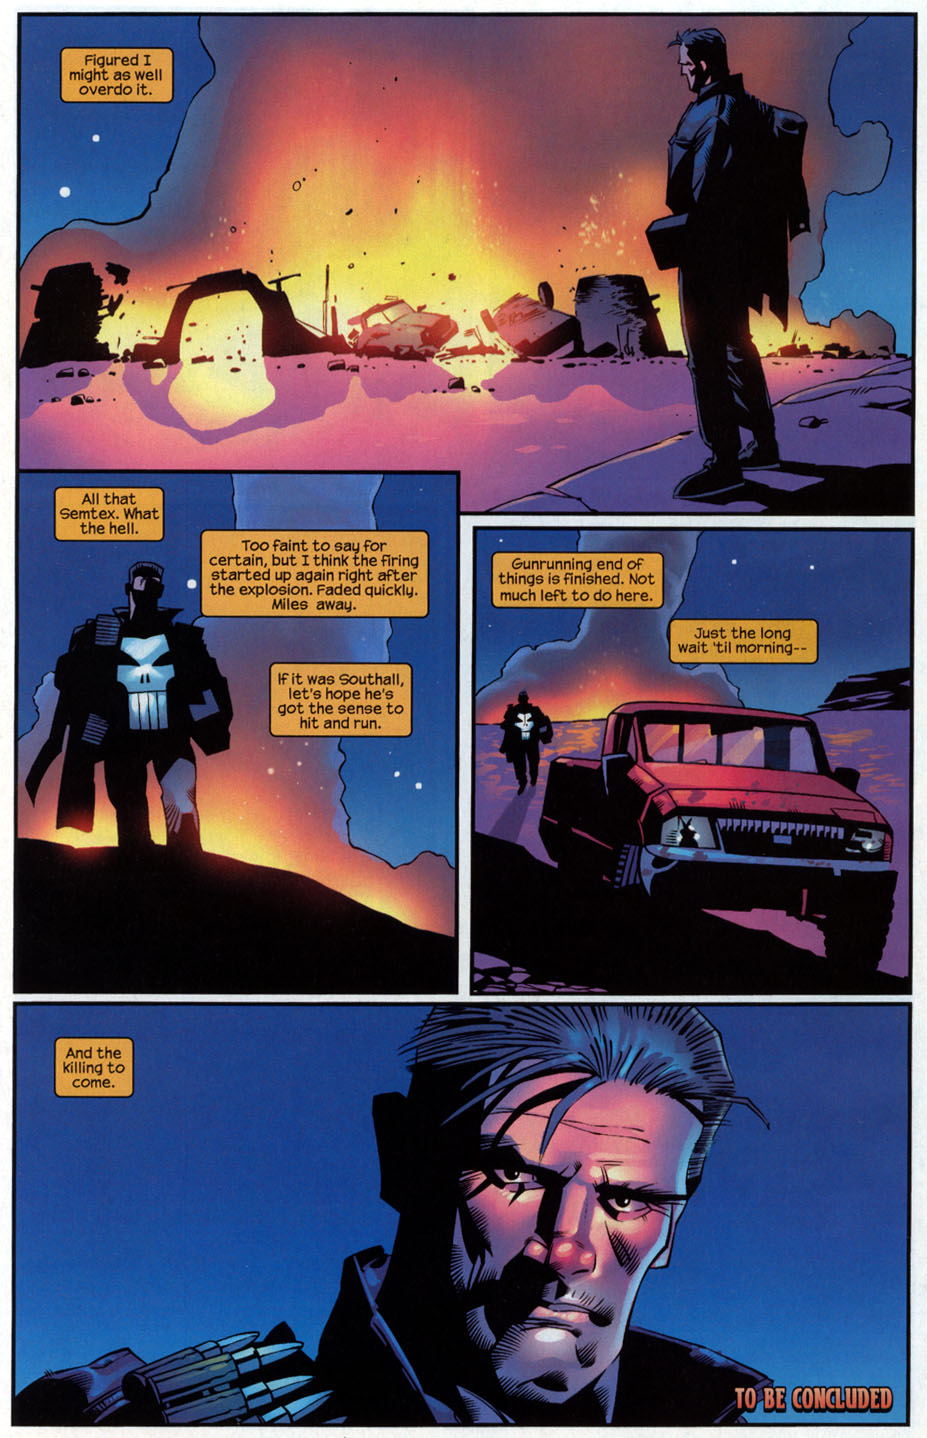 The Punisher (2001) issue 30 - Streets of Laredo #03 - Page 23